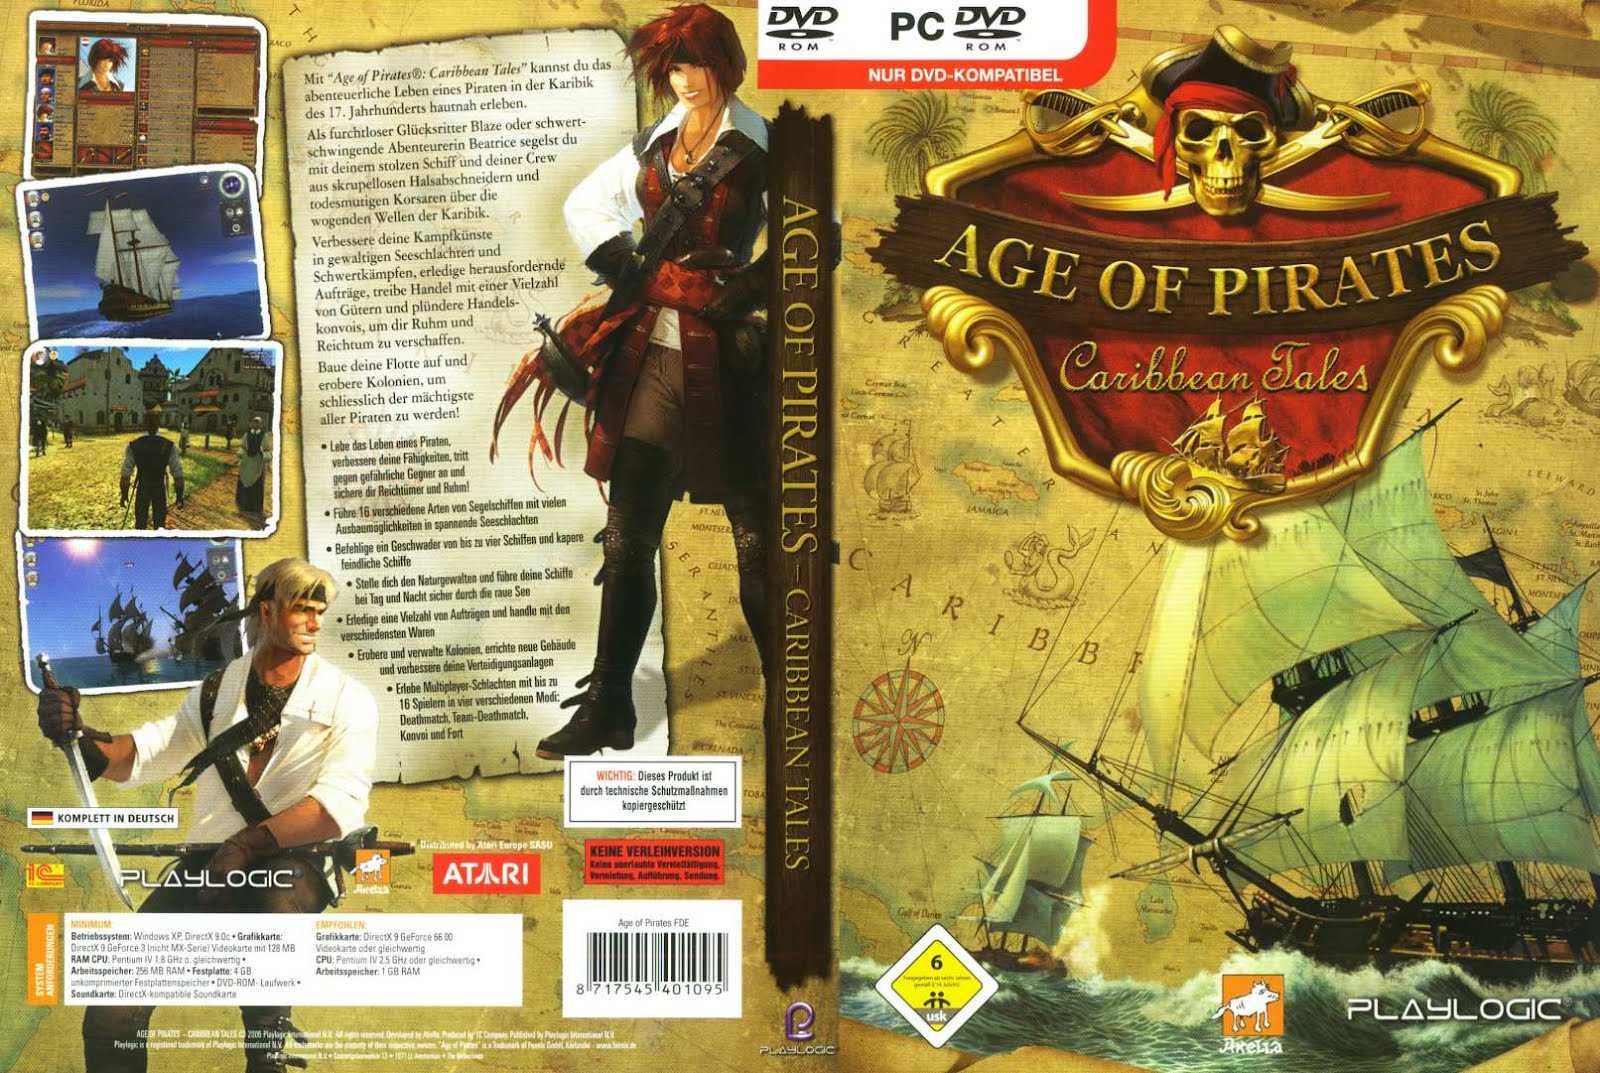 Tales of pirates